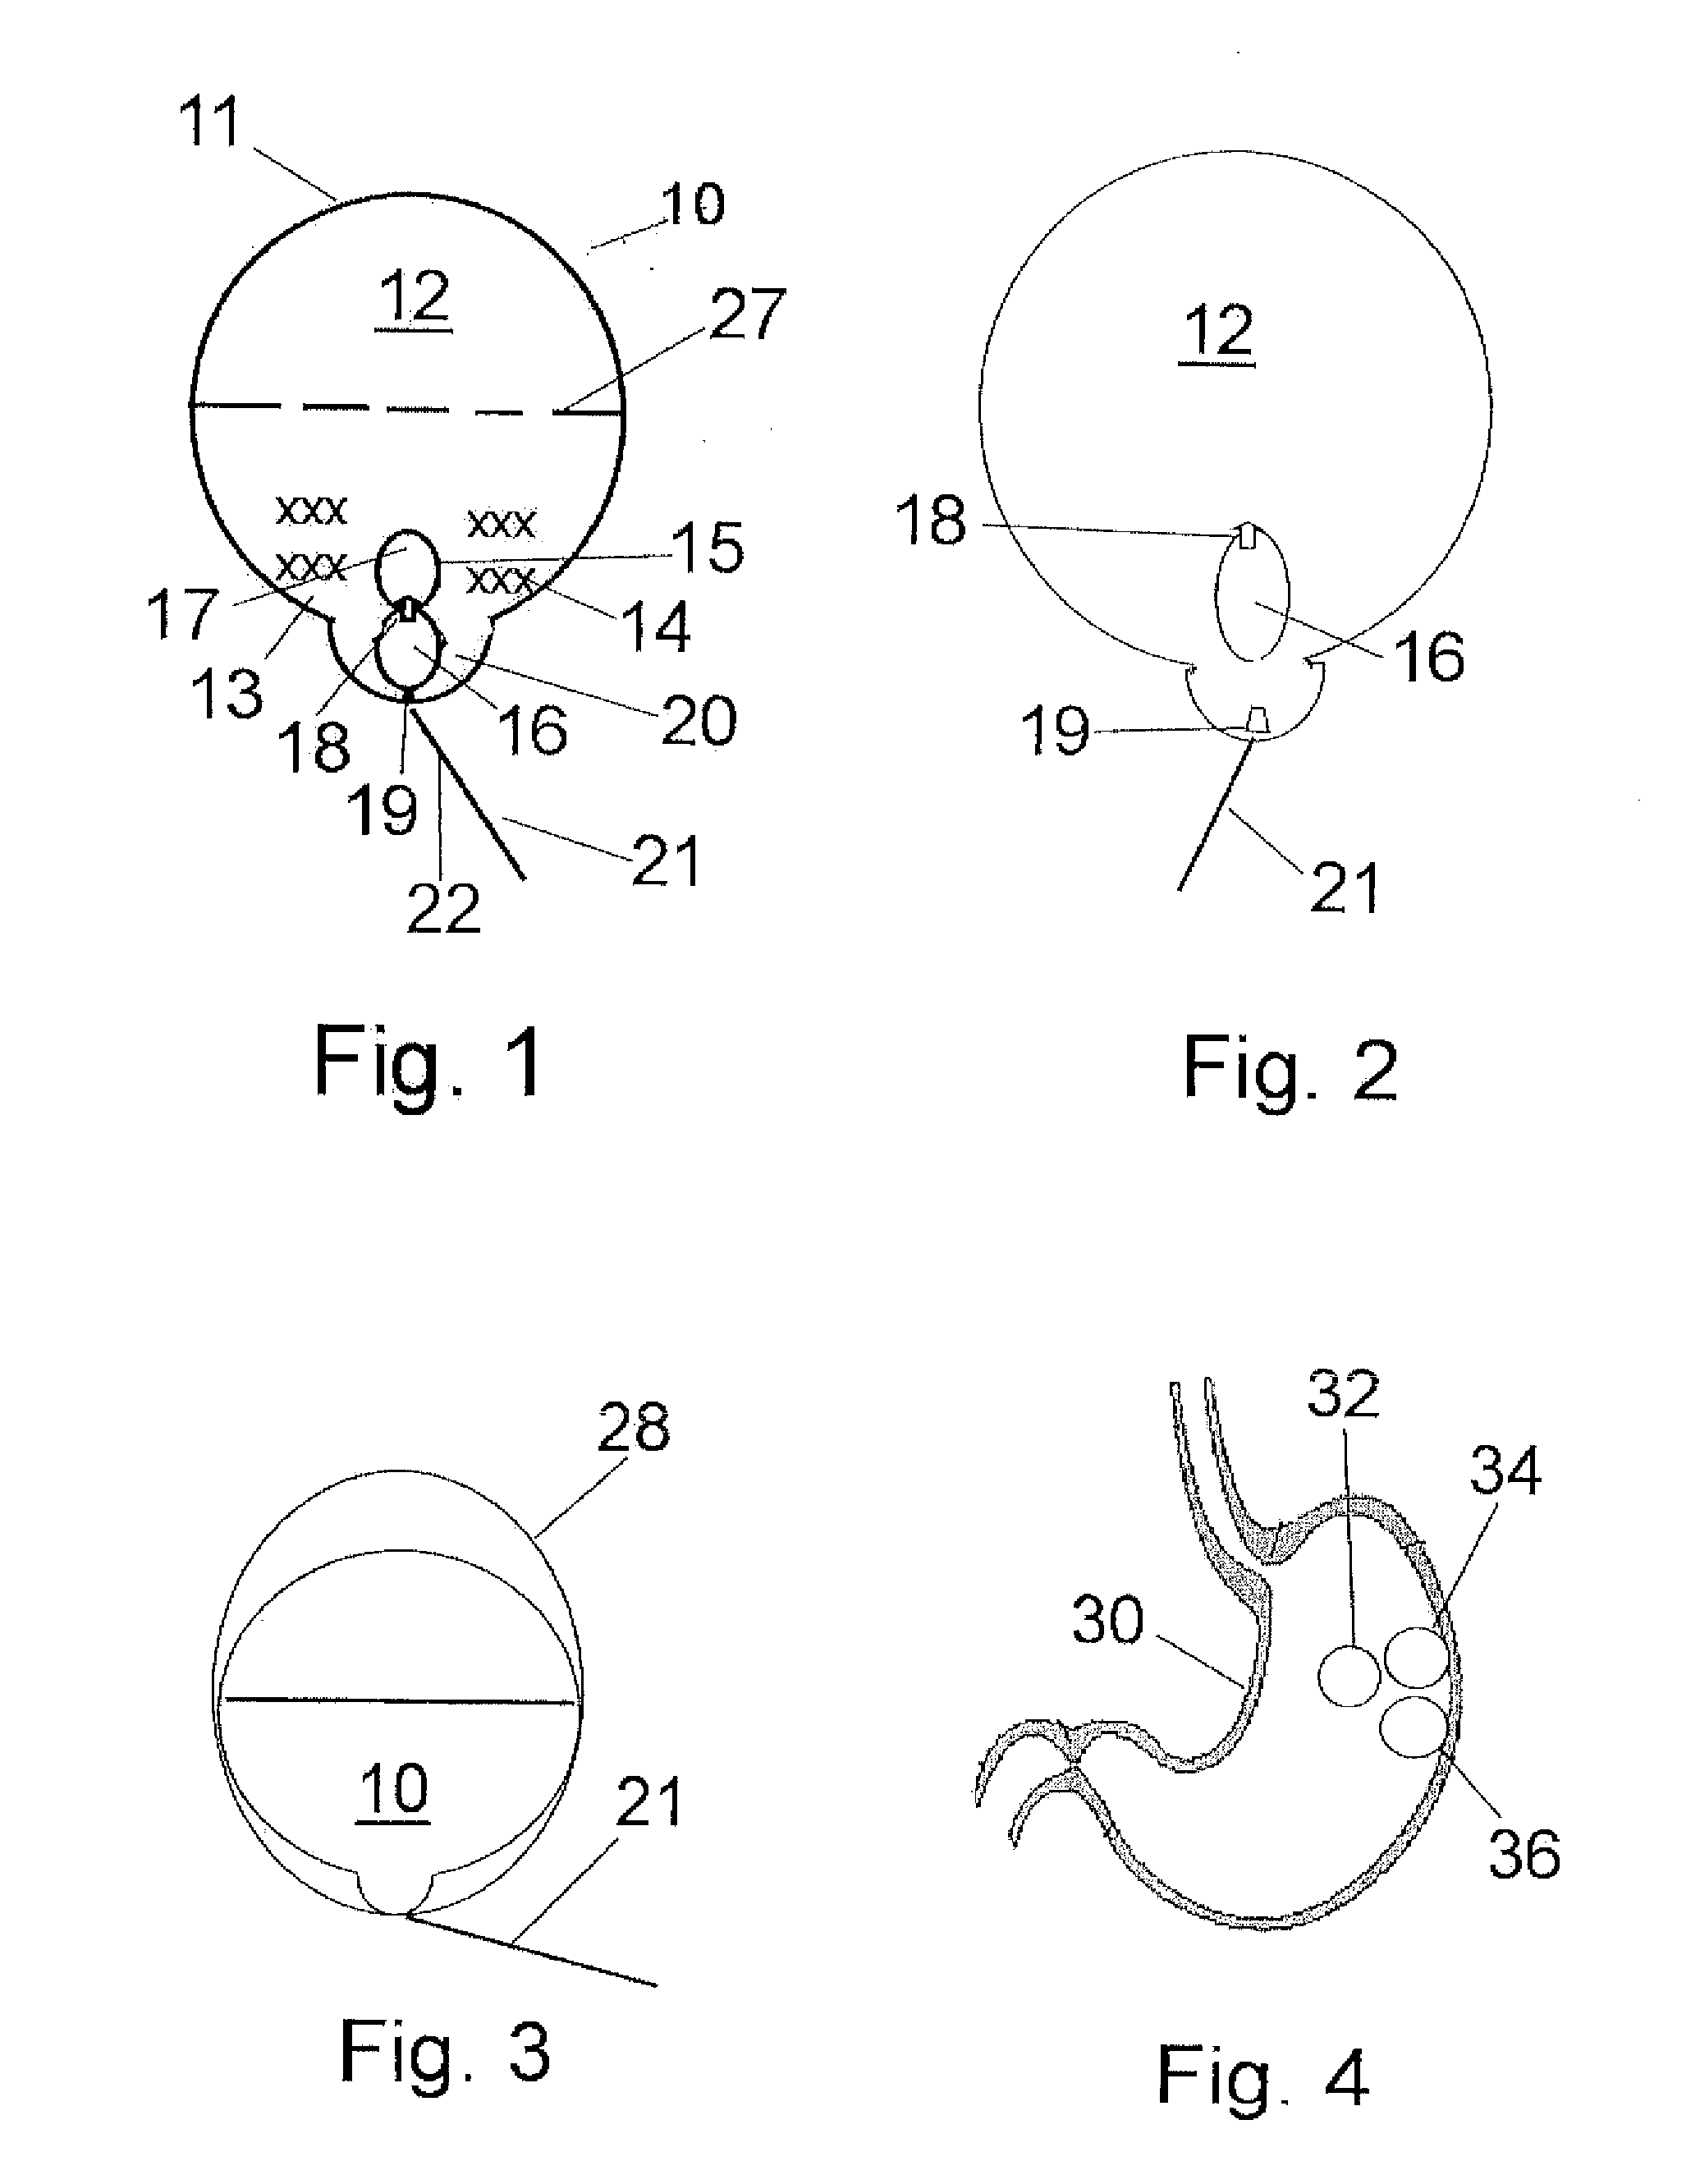 Self-inflating and deflating intragastric balloon implant device